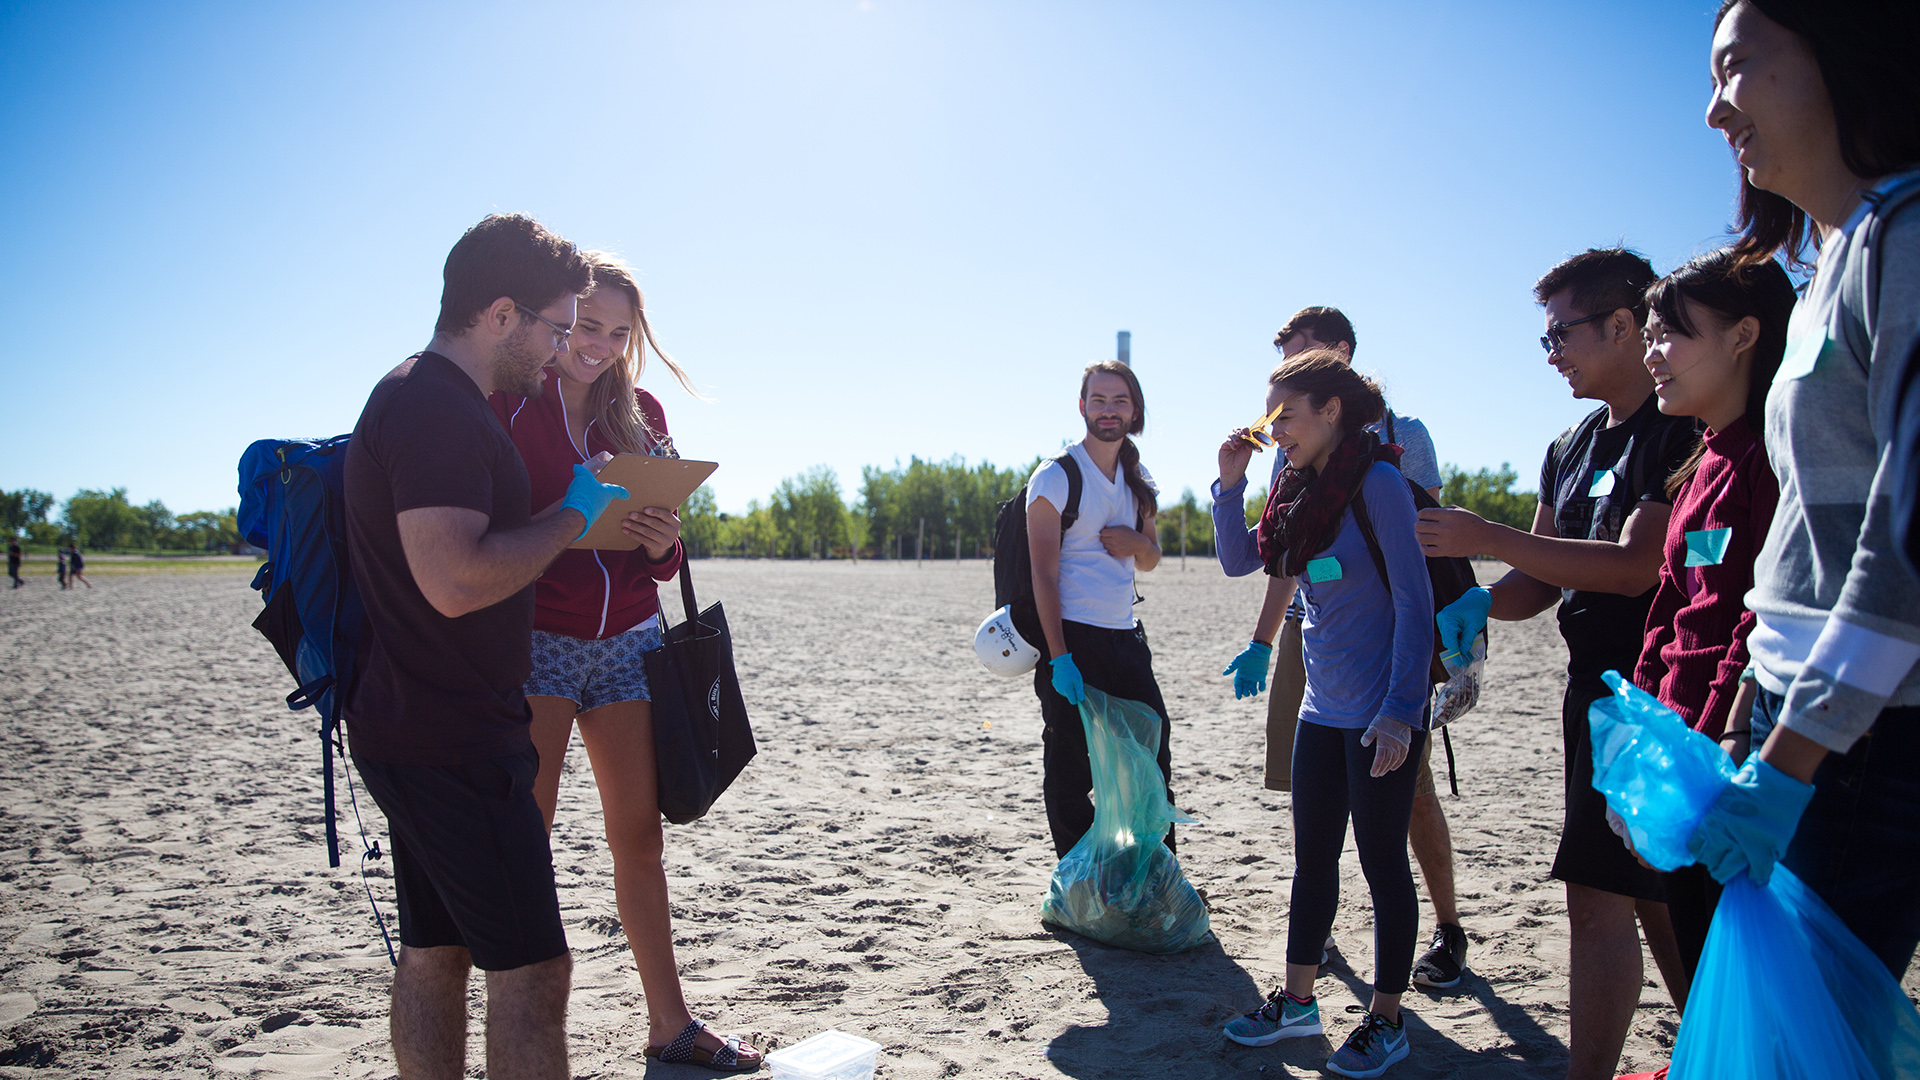 A group participating in a shoreline cleanup gathered on the beach